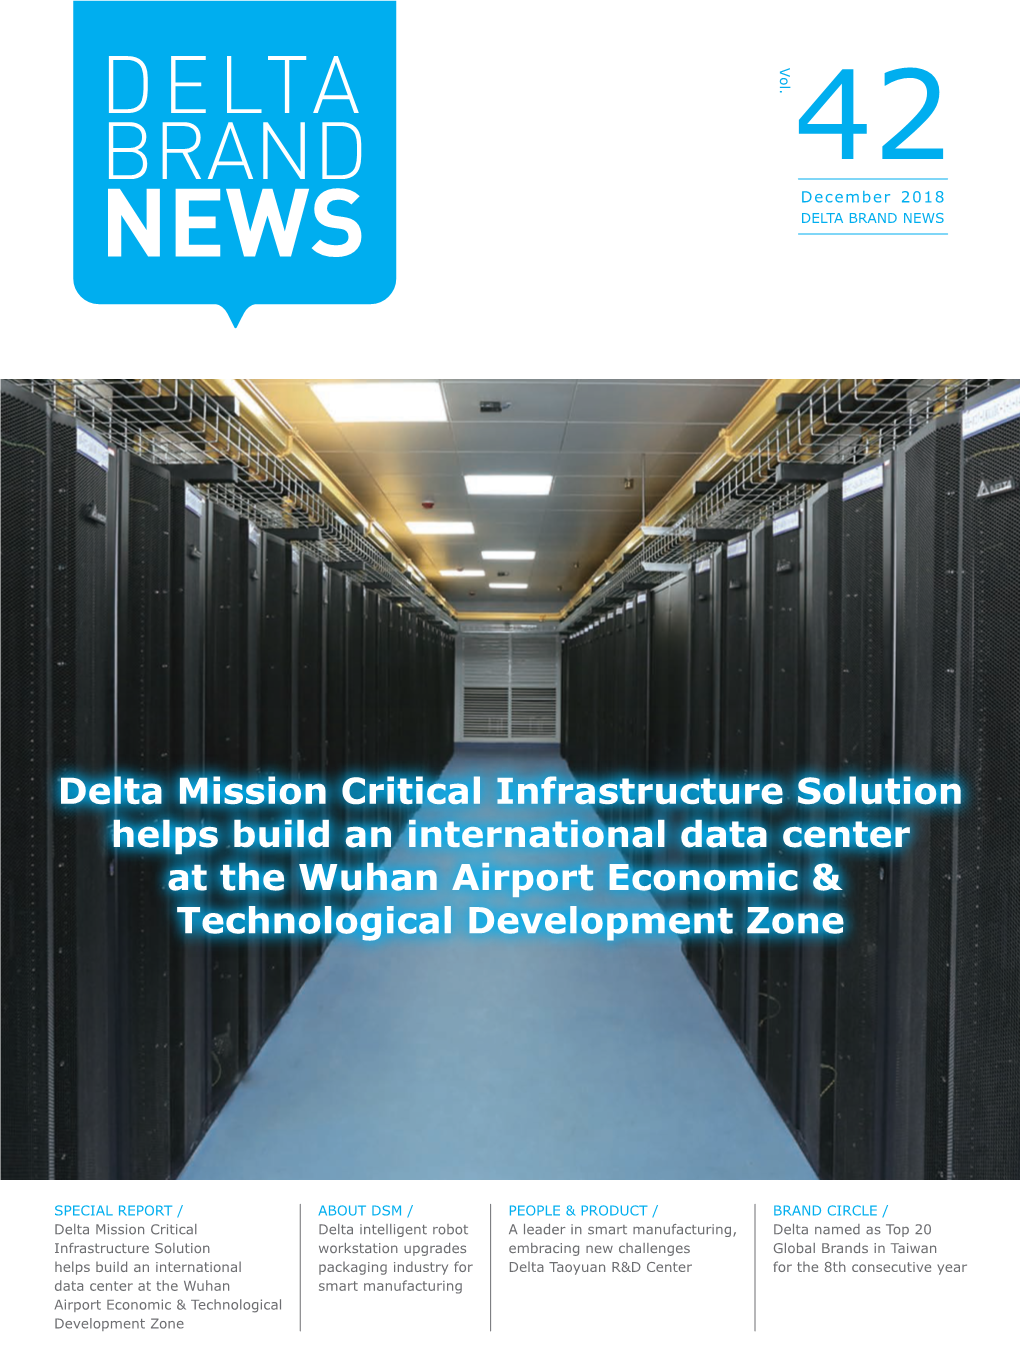 Delta Mission Critical Infrastructure Solution Helps Build an International Data Center at the Wuhan Airport Economic & Technological Development Zone